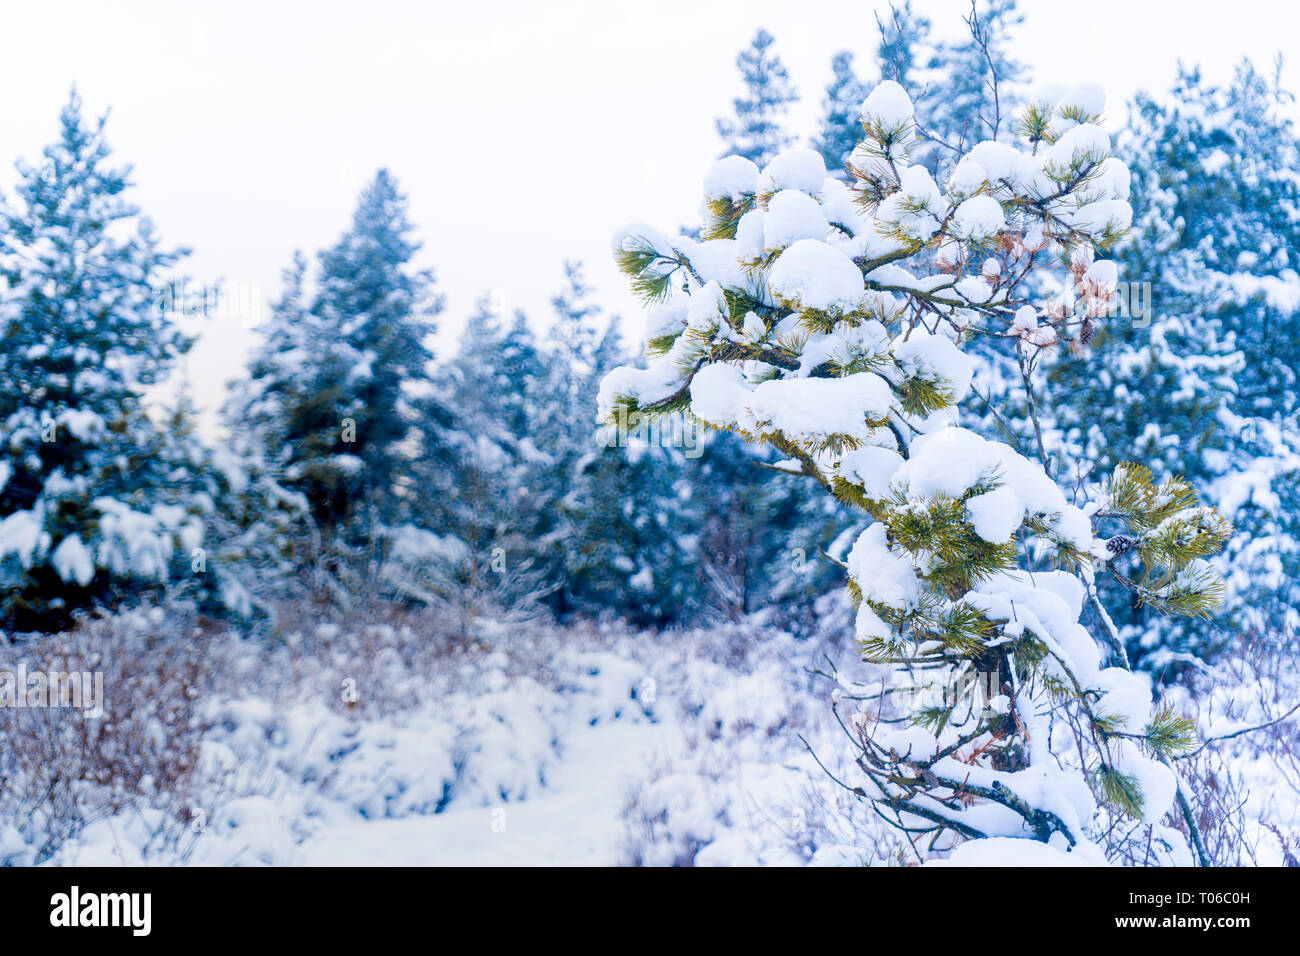 Evergreen pine shrub tree in snowfall after a snowstorm in Vancouver (Delta) BC, at Burns Bog. Snowy forest scenes. Stock Photo